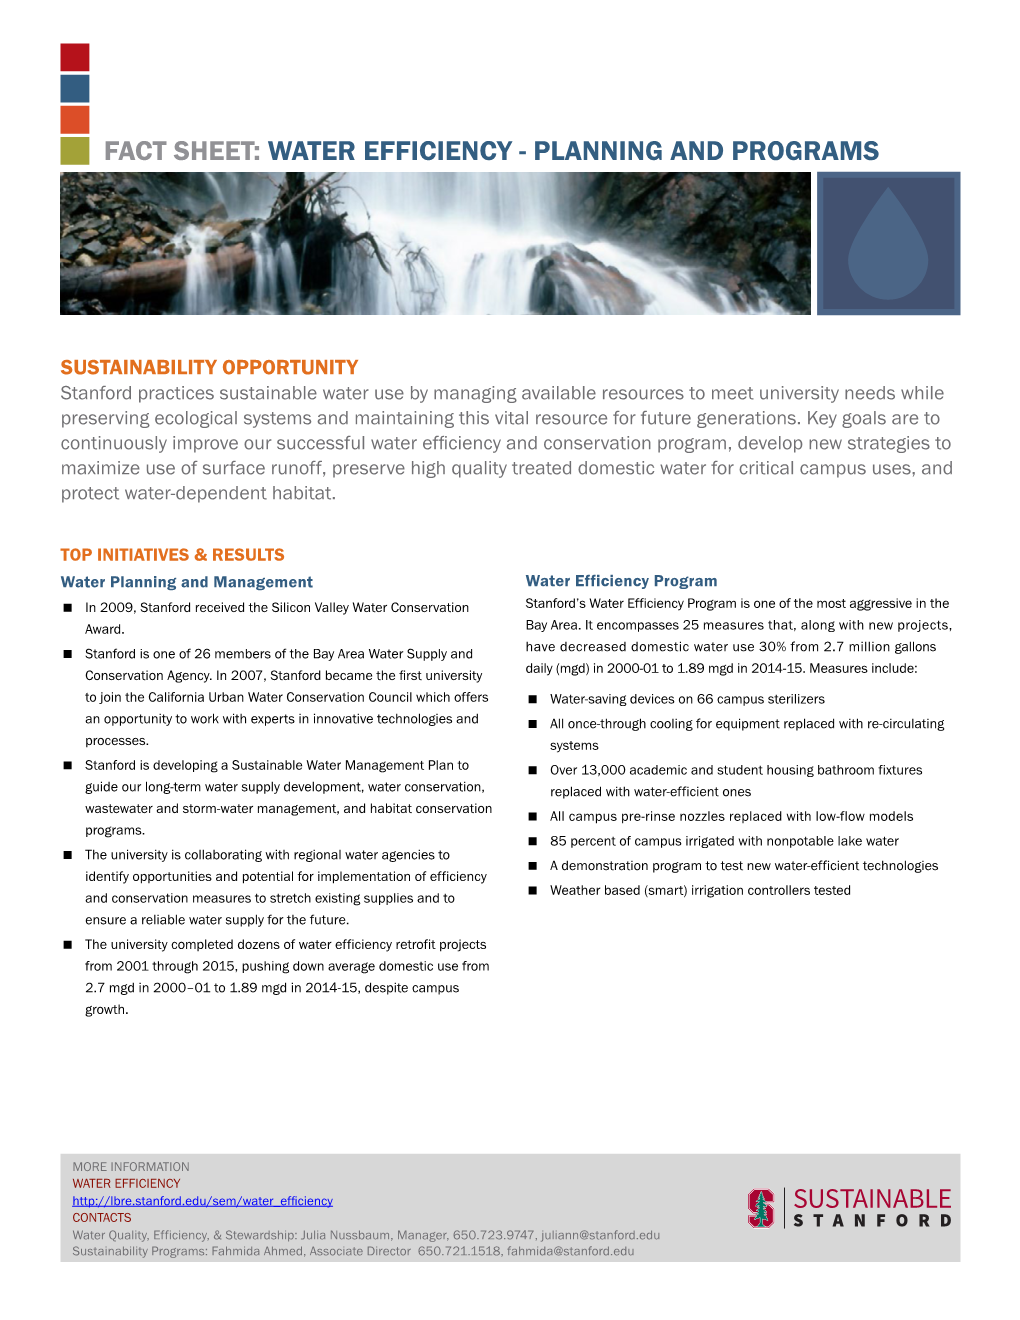 Fact Sheet: Water Efficiency - Planning and Programs